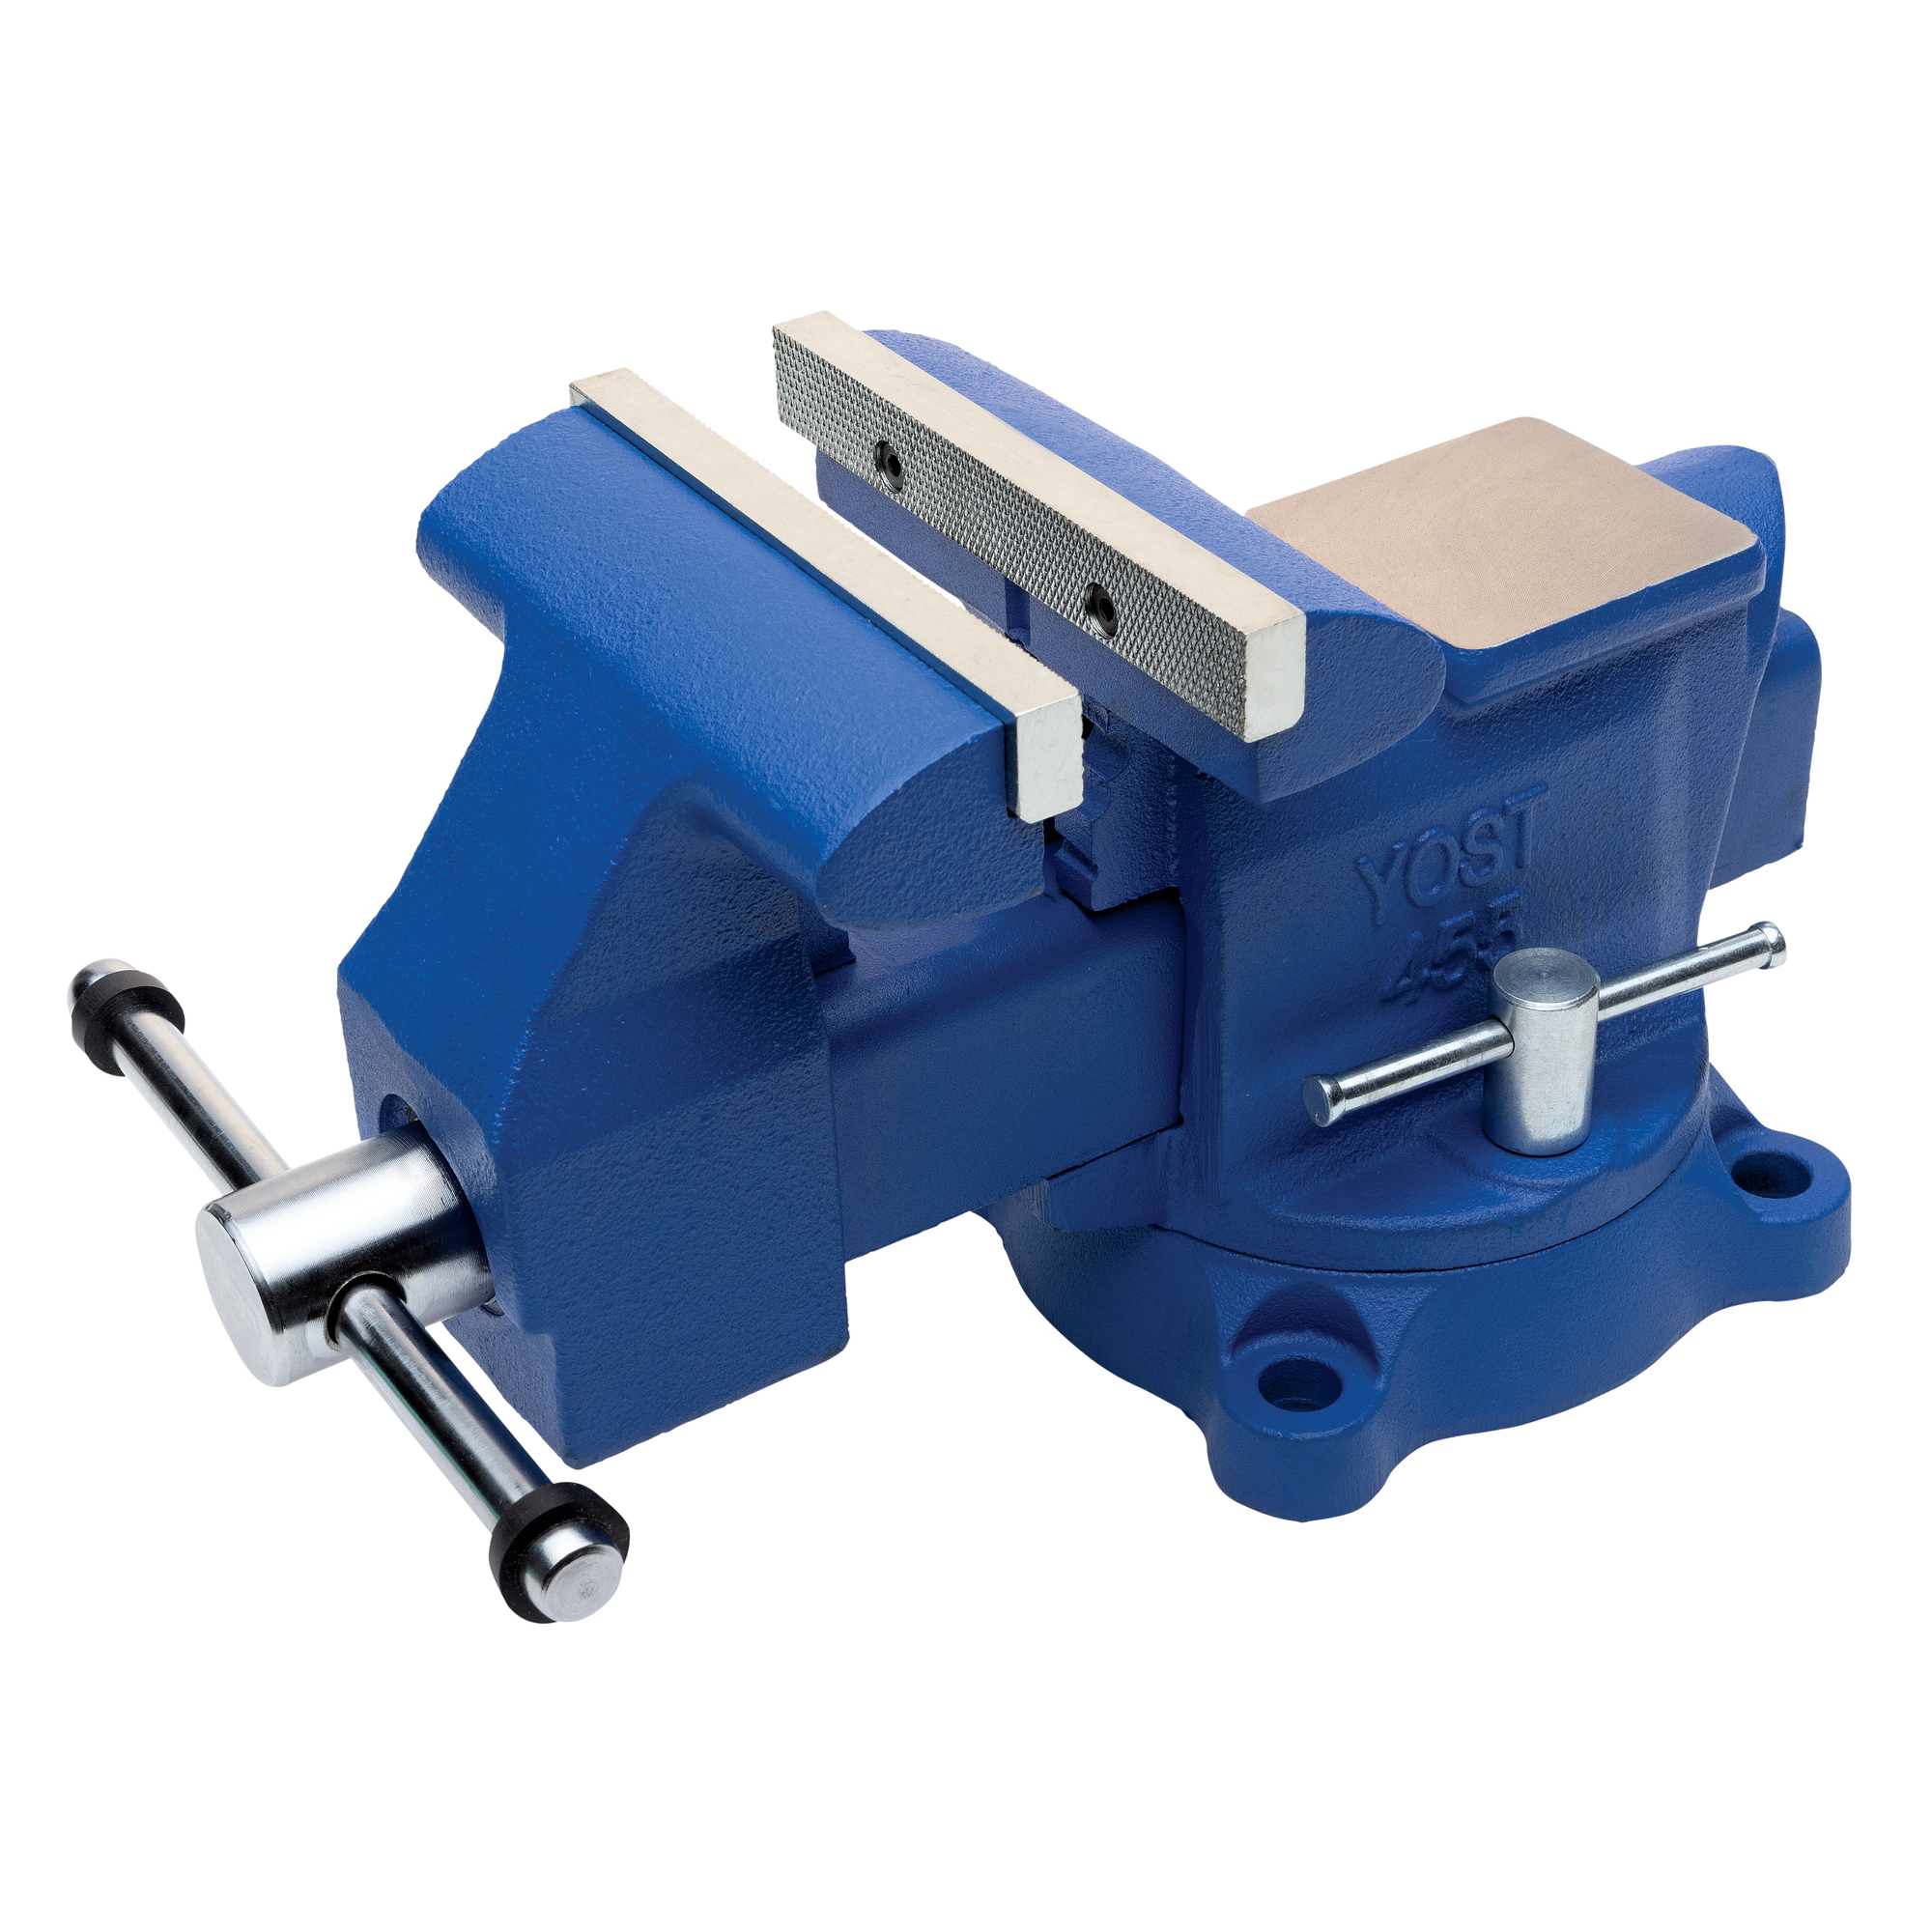 Yost Vises, 5.5Inch Utility Bench Vise, Jaw Width 5.5 in, Jaw Capacity 5 in, Material Cast Iron, Model 455